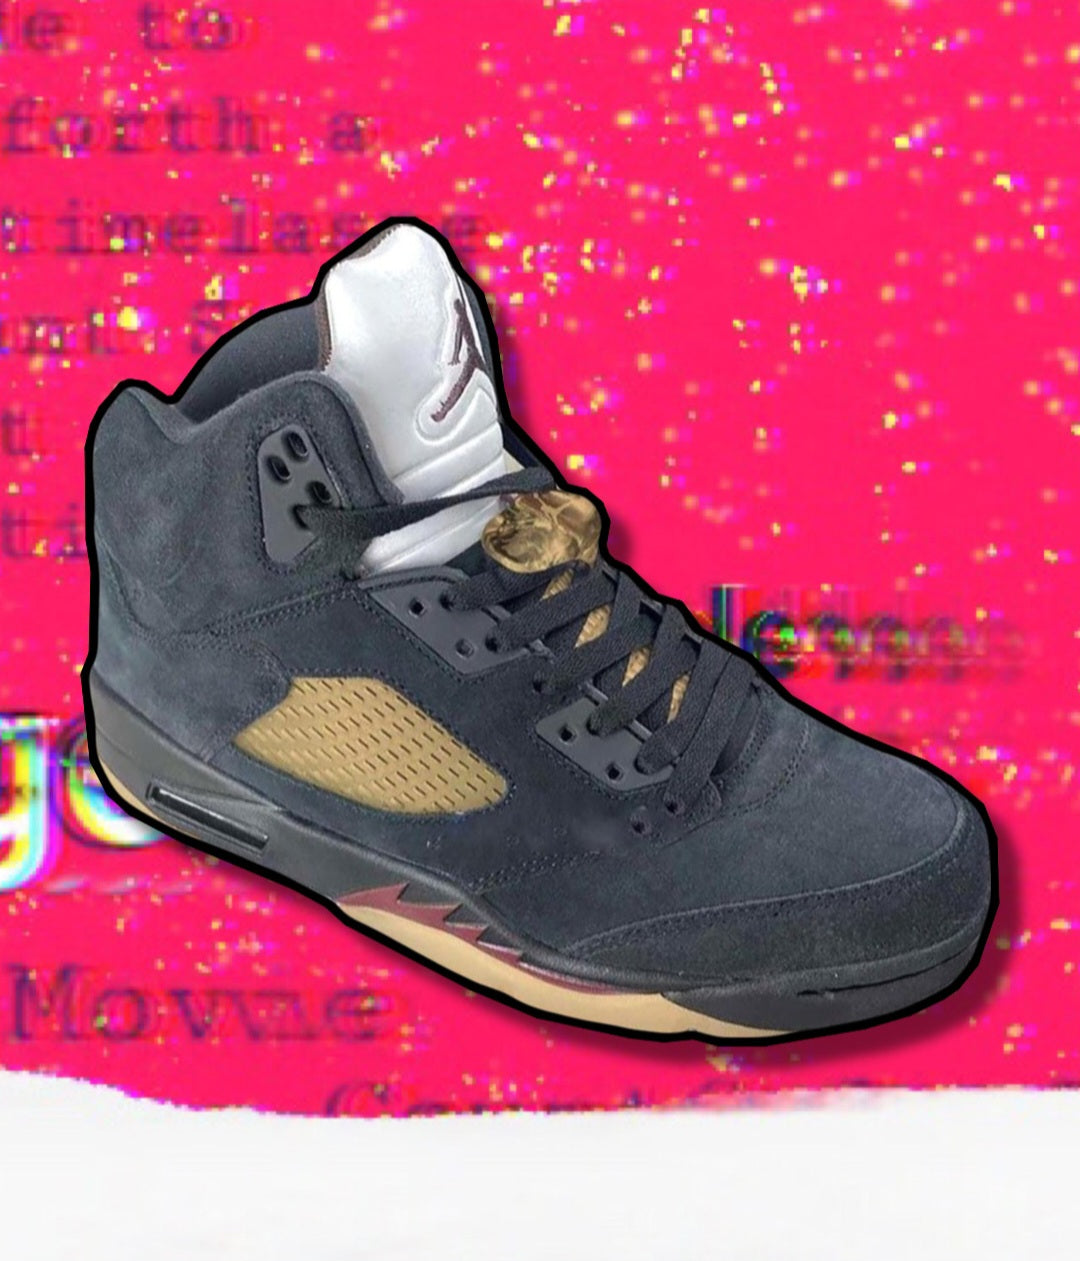 First look at A Ma Maniere Jordan 5 Surfaces.